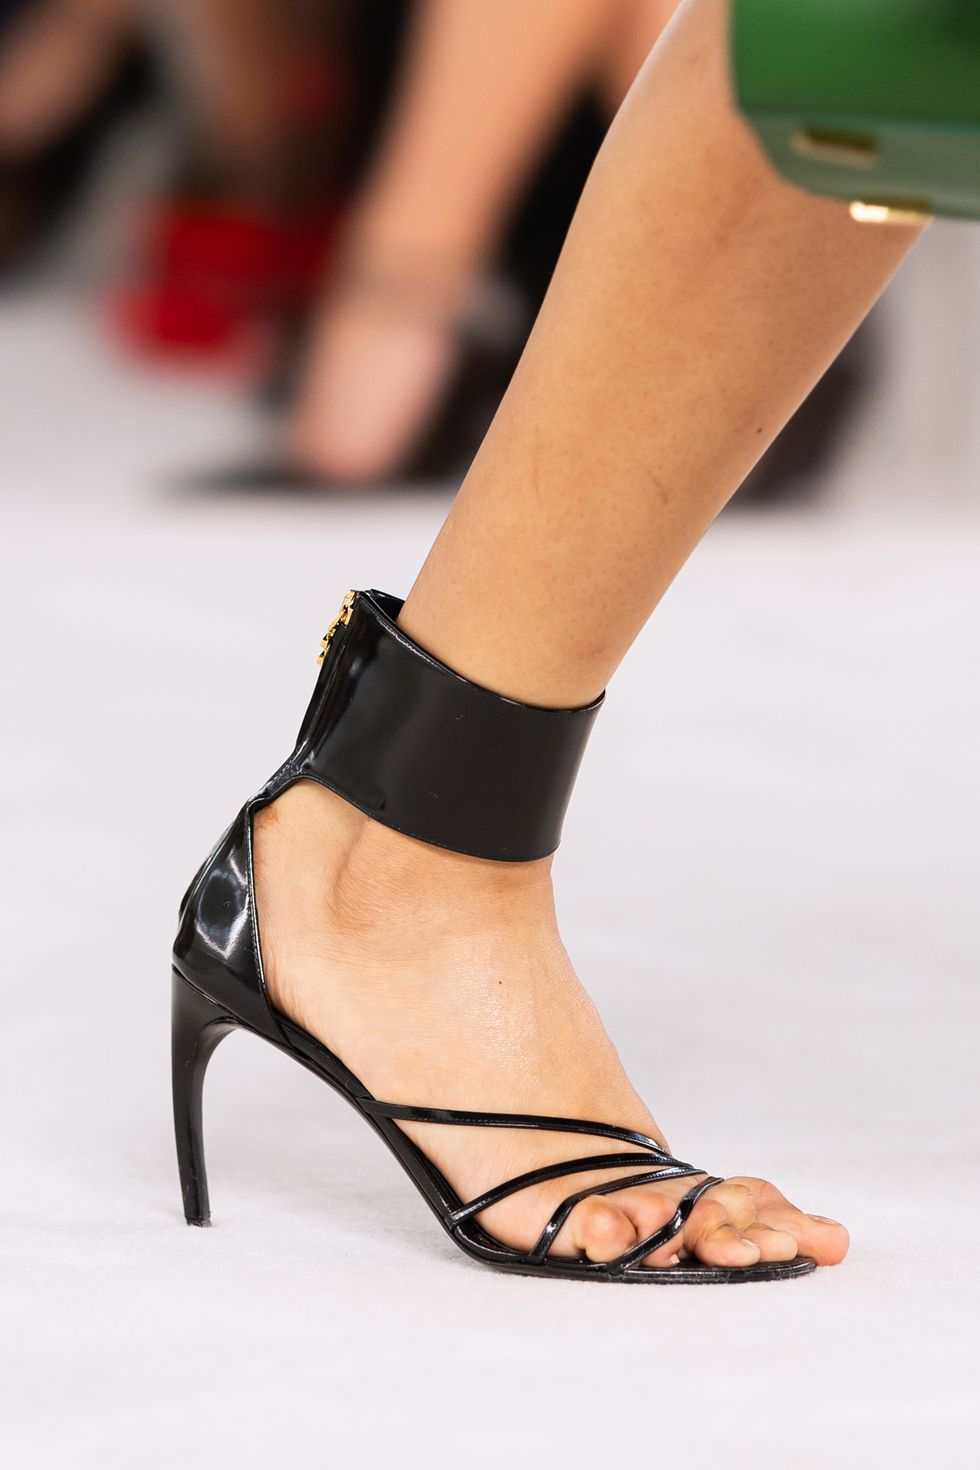 milan, italy september 23 a model, shoe detail, walks the runway at the ferragamo fashion show during the milan fashion week womenswear springsummer 2024 on september 23, 2023 in milan, italy photo by justin shingetty images